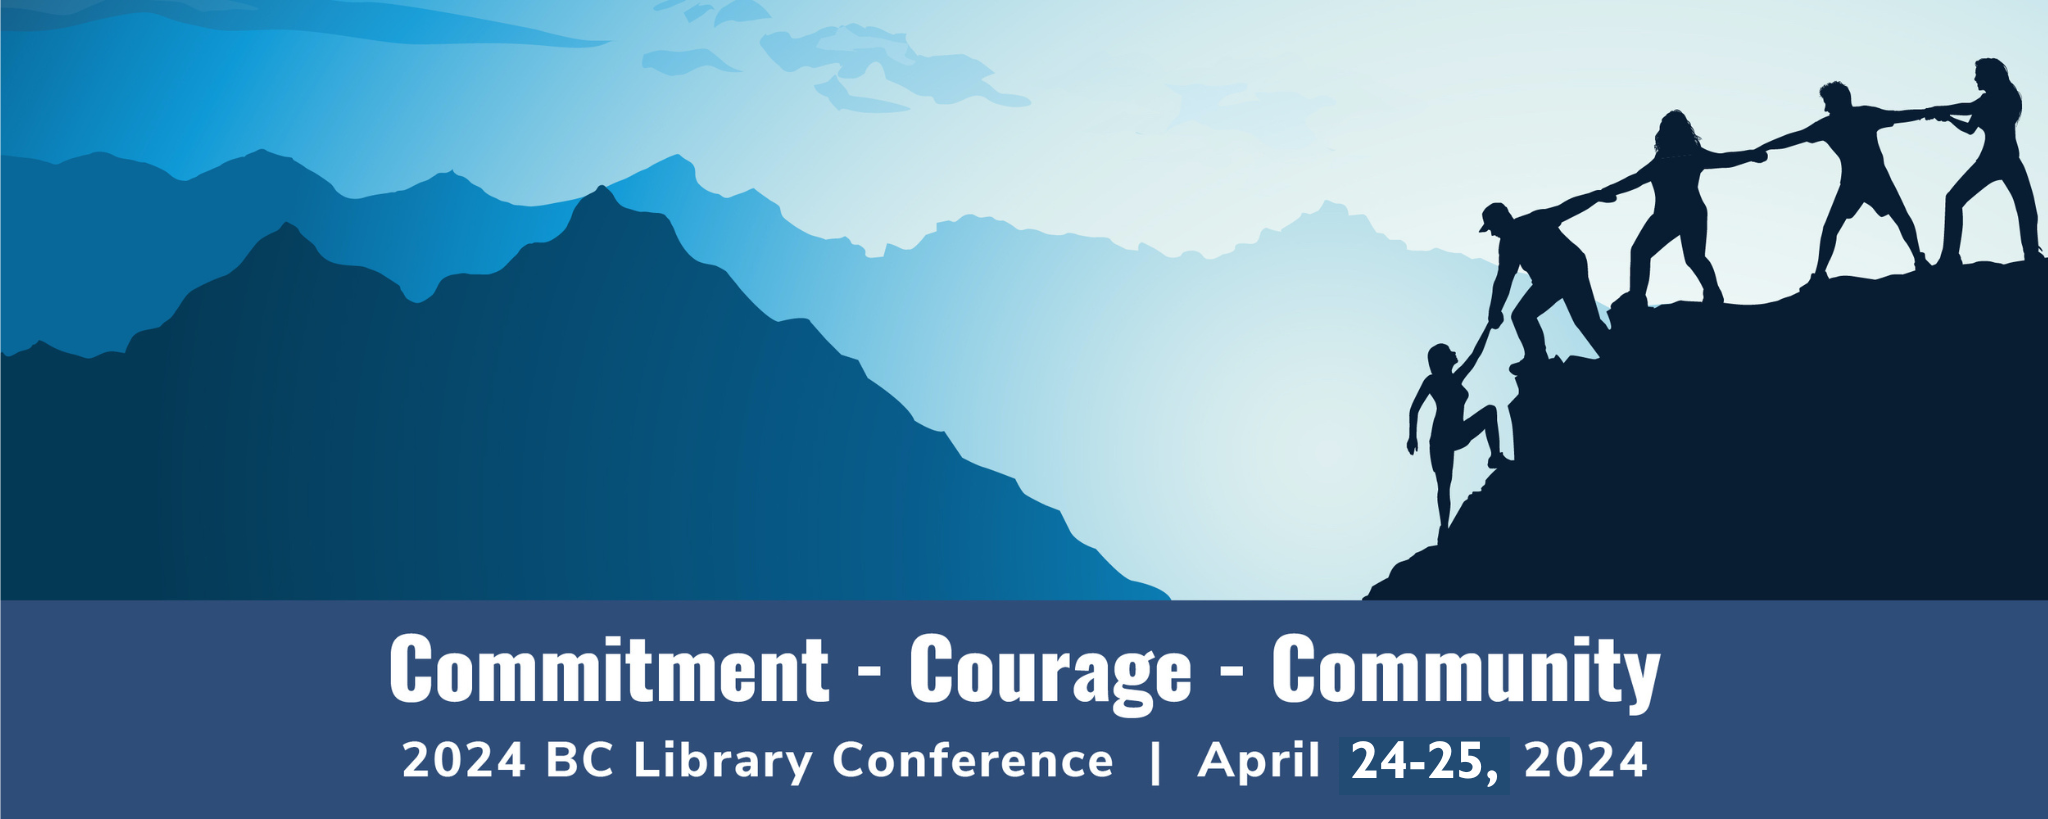 2024 BC Library Conference April 24-25, 2024 Commitment Courage Community